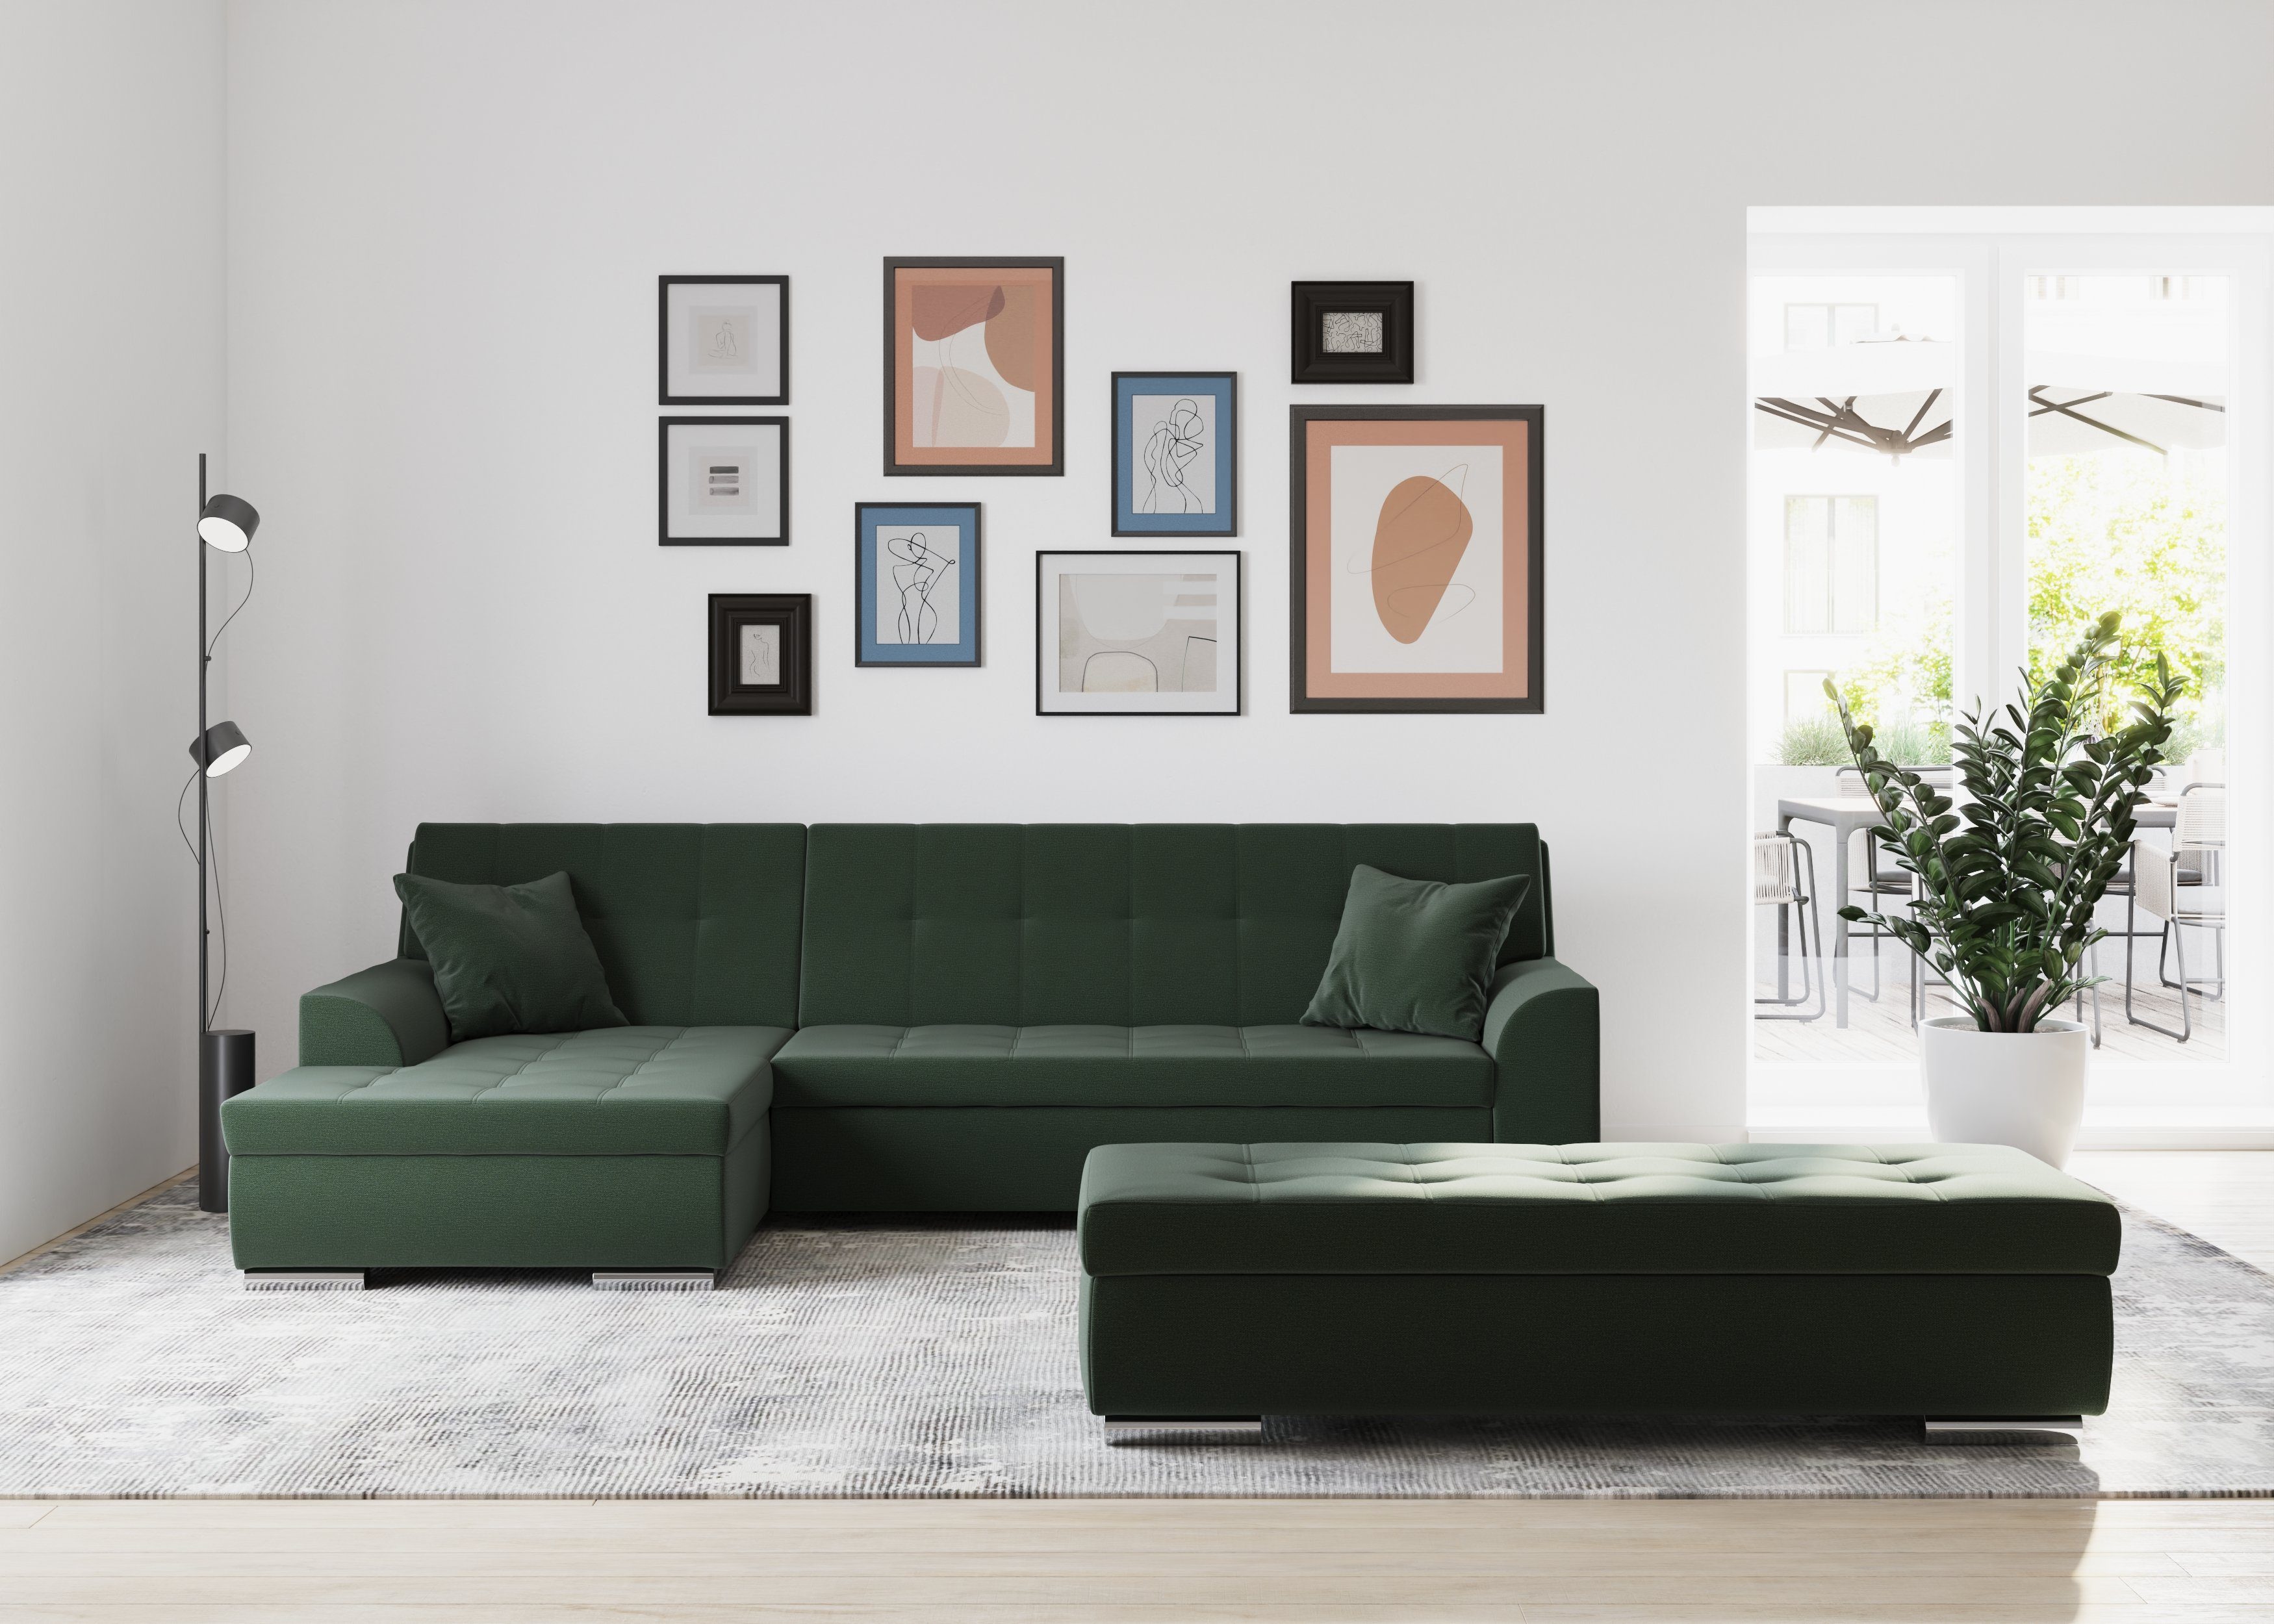 collection wahlweise Cord Bettfunktion, DOMO in Ecksofa mit auch Treviso,